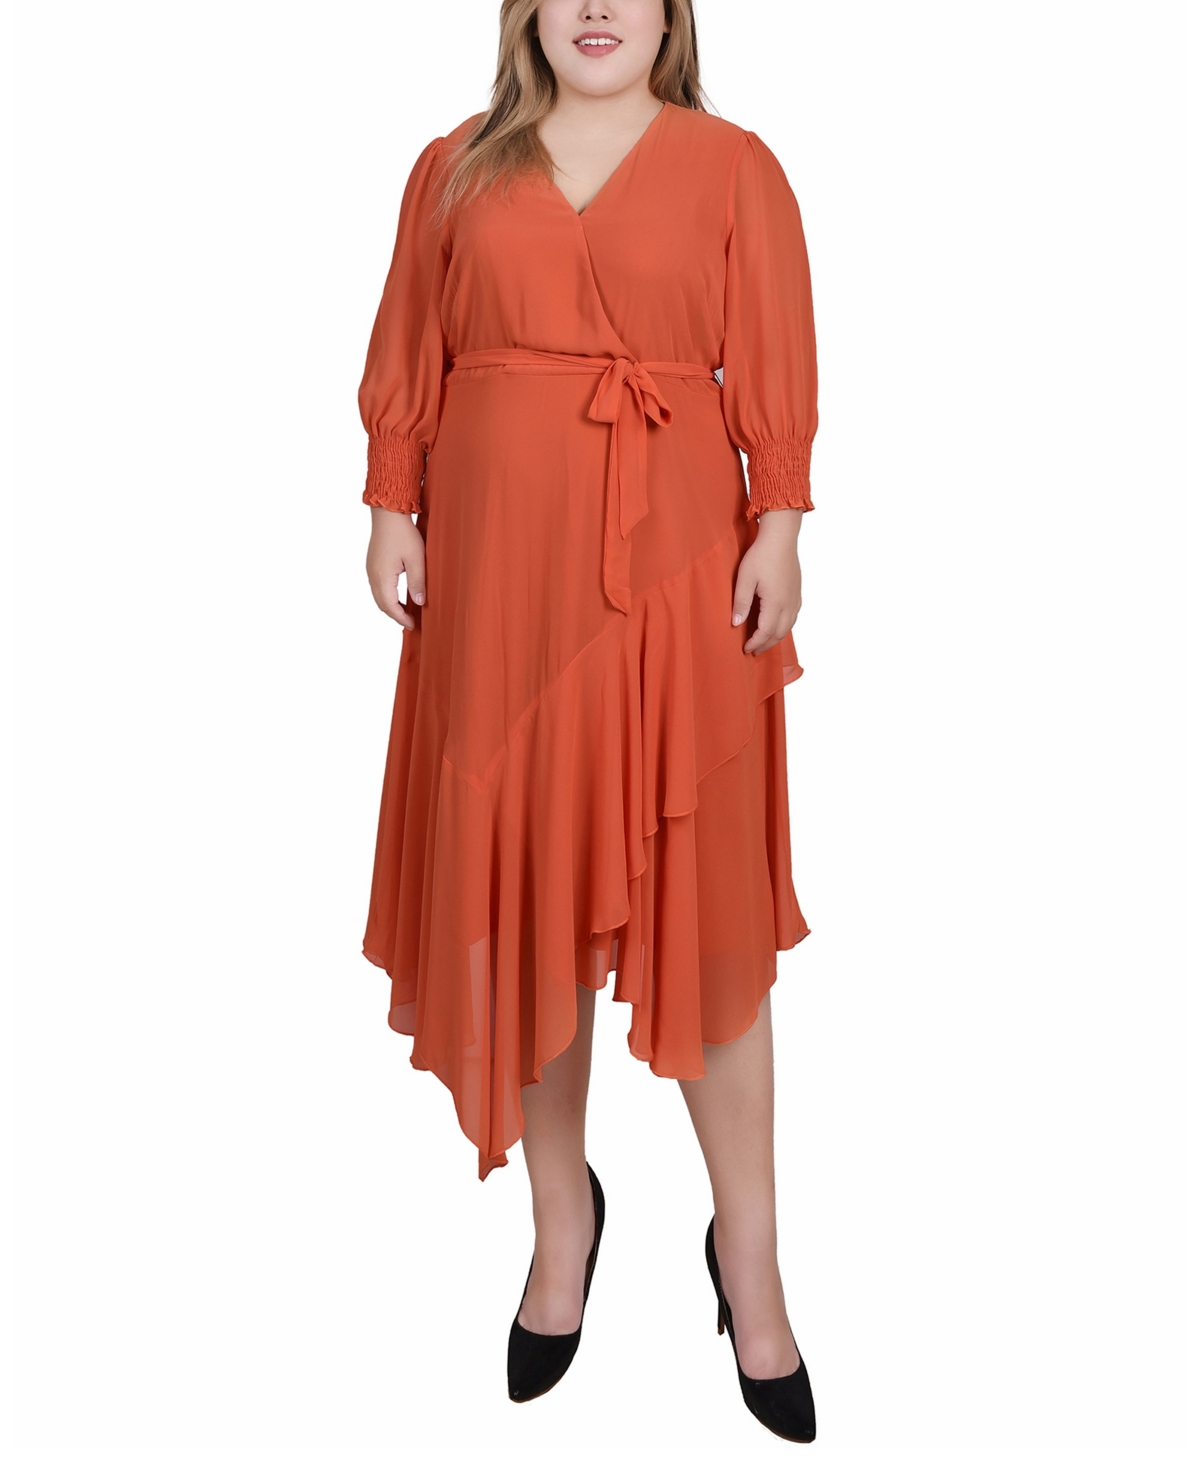 1920s Style Dresses, 1920s Dress Fashions You Will Love Ny Collection Plus Size 34 Sleeve Belted Chiffon Handkerchief Hem Dress - Orange Rust $27.90 AT vintagedancer.com